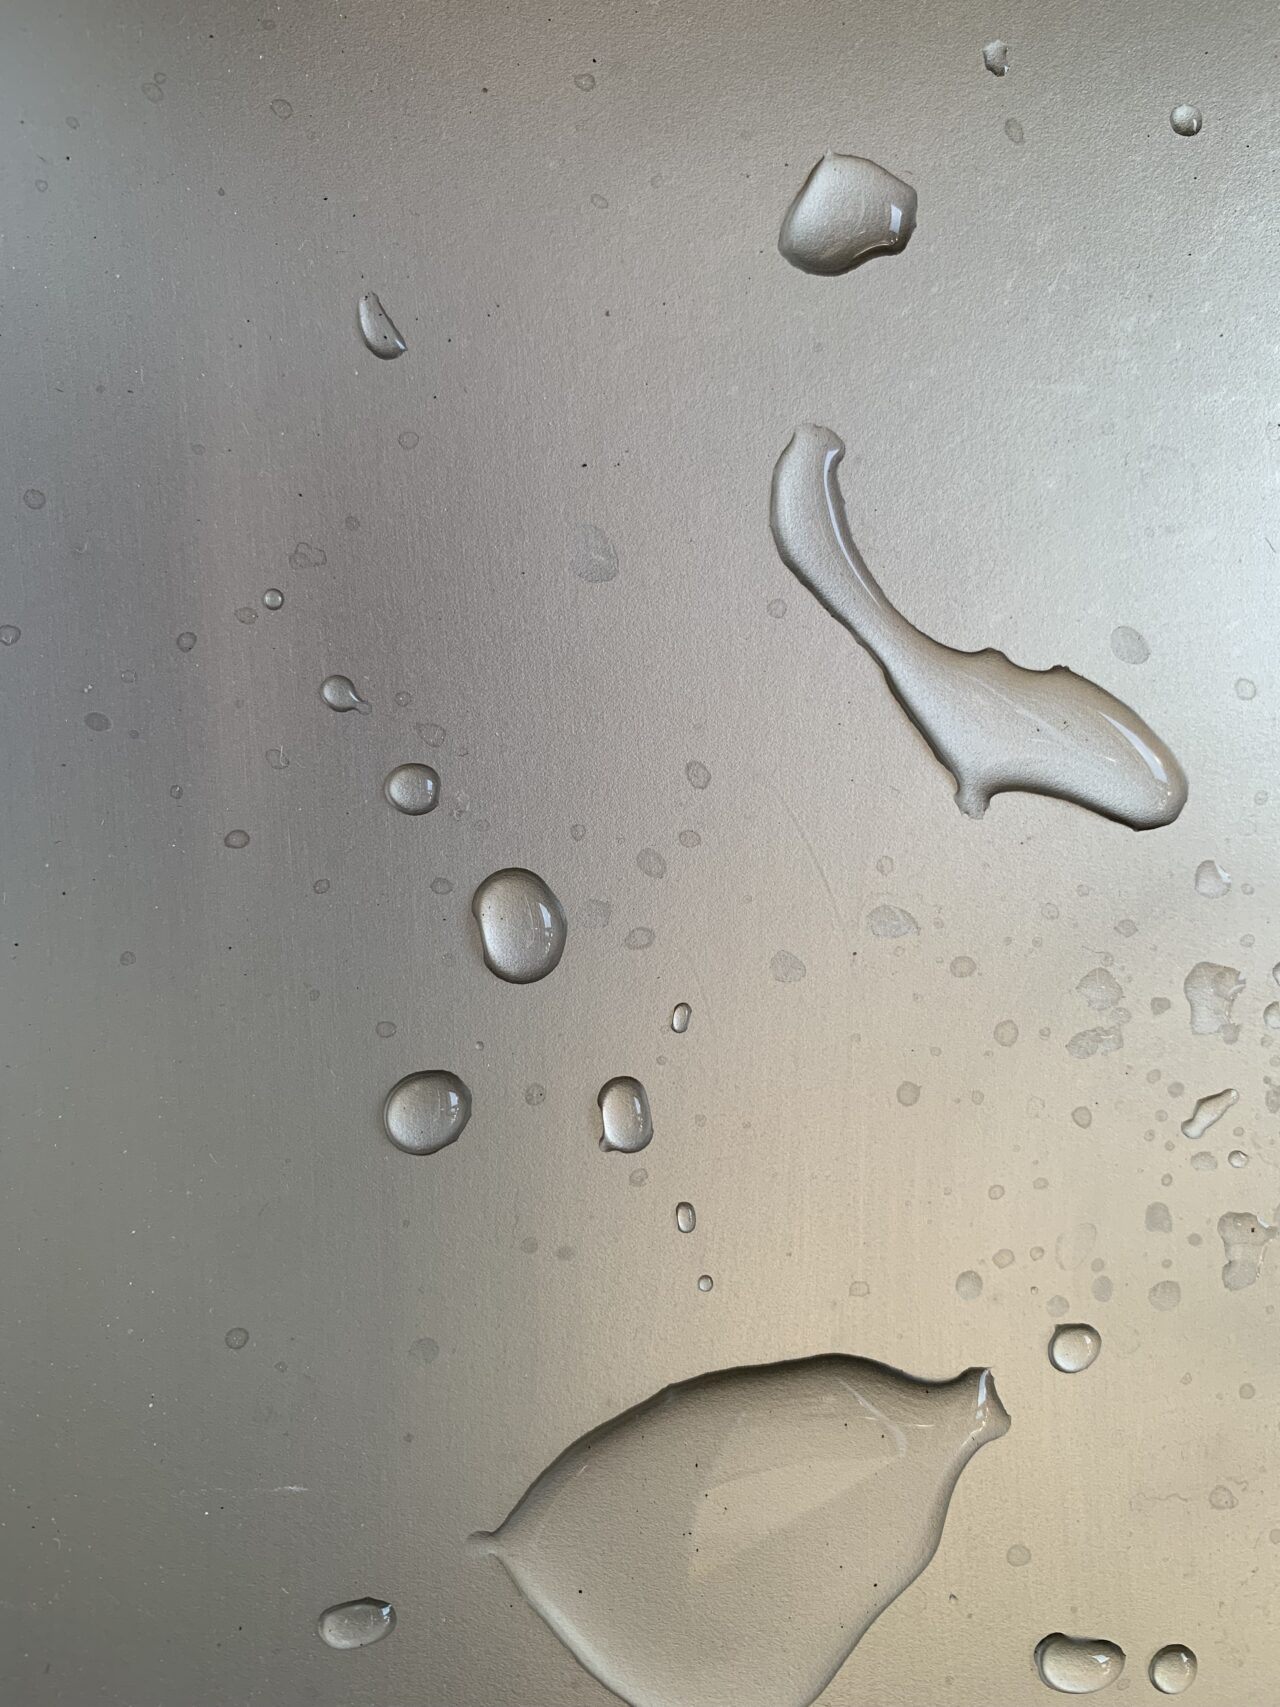 Spilled Water Drops On Metal Surface